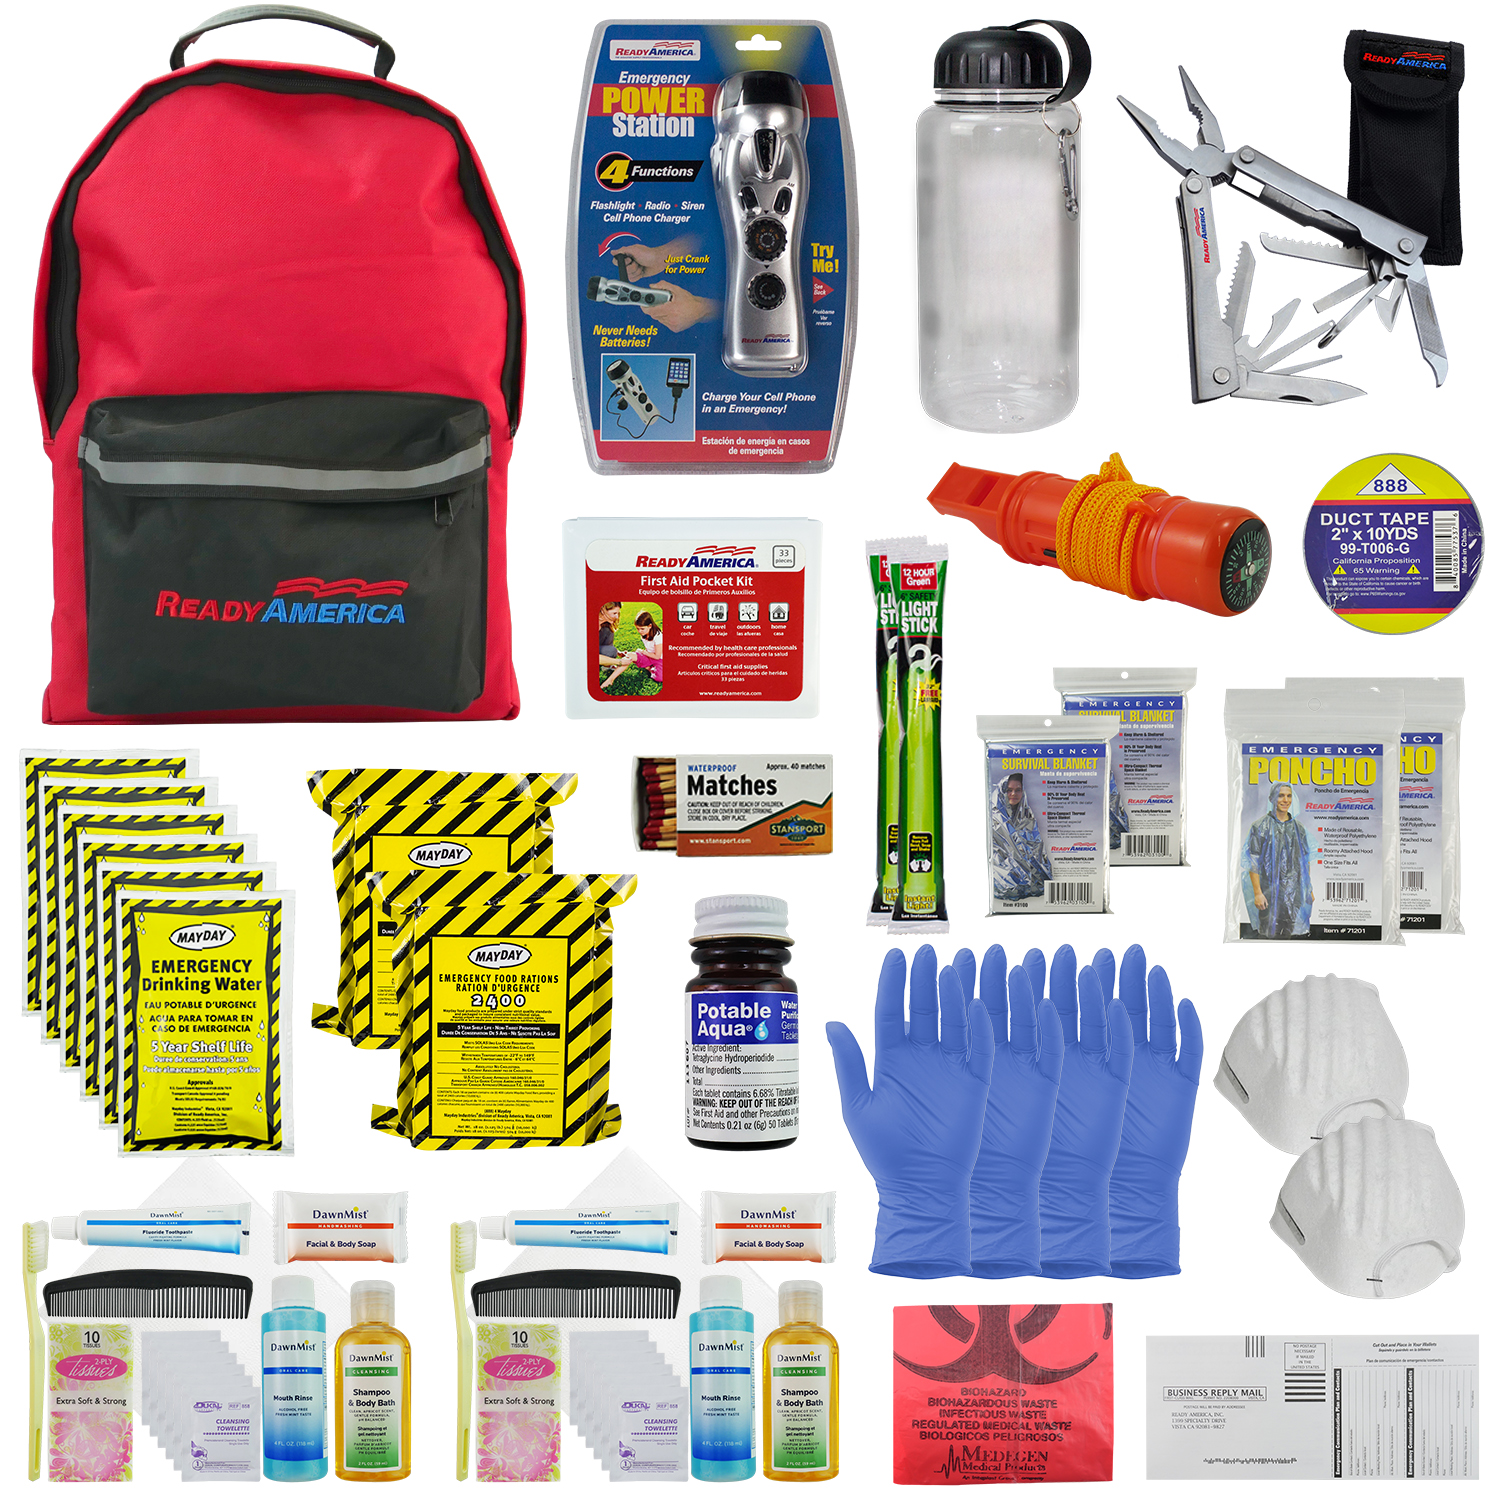 Emergency Survival Kits & First Aid Kit, Multi-Tools Survival Gear and  Equipment with Molle Pouch,